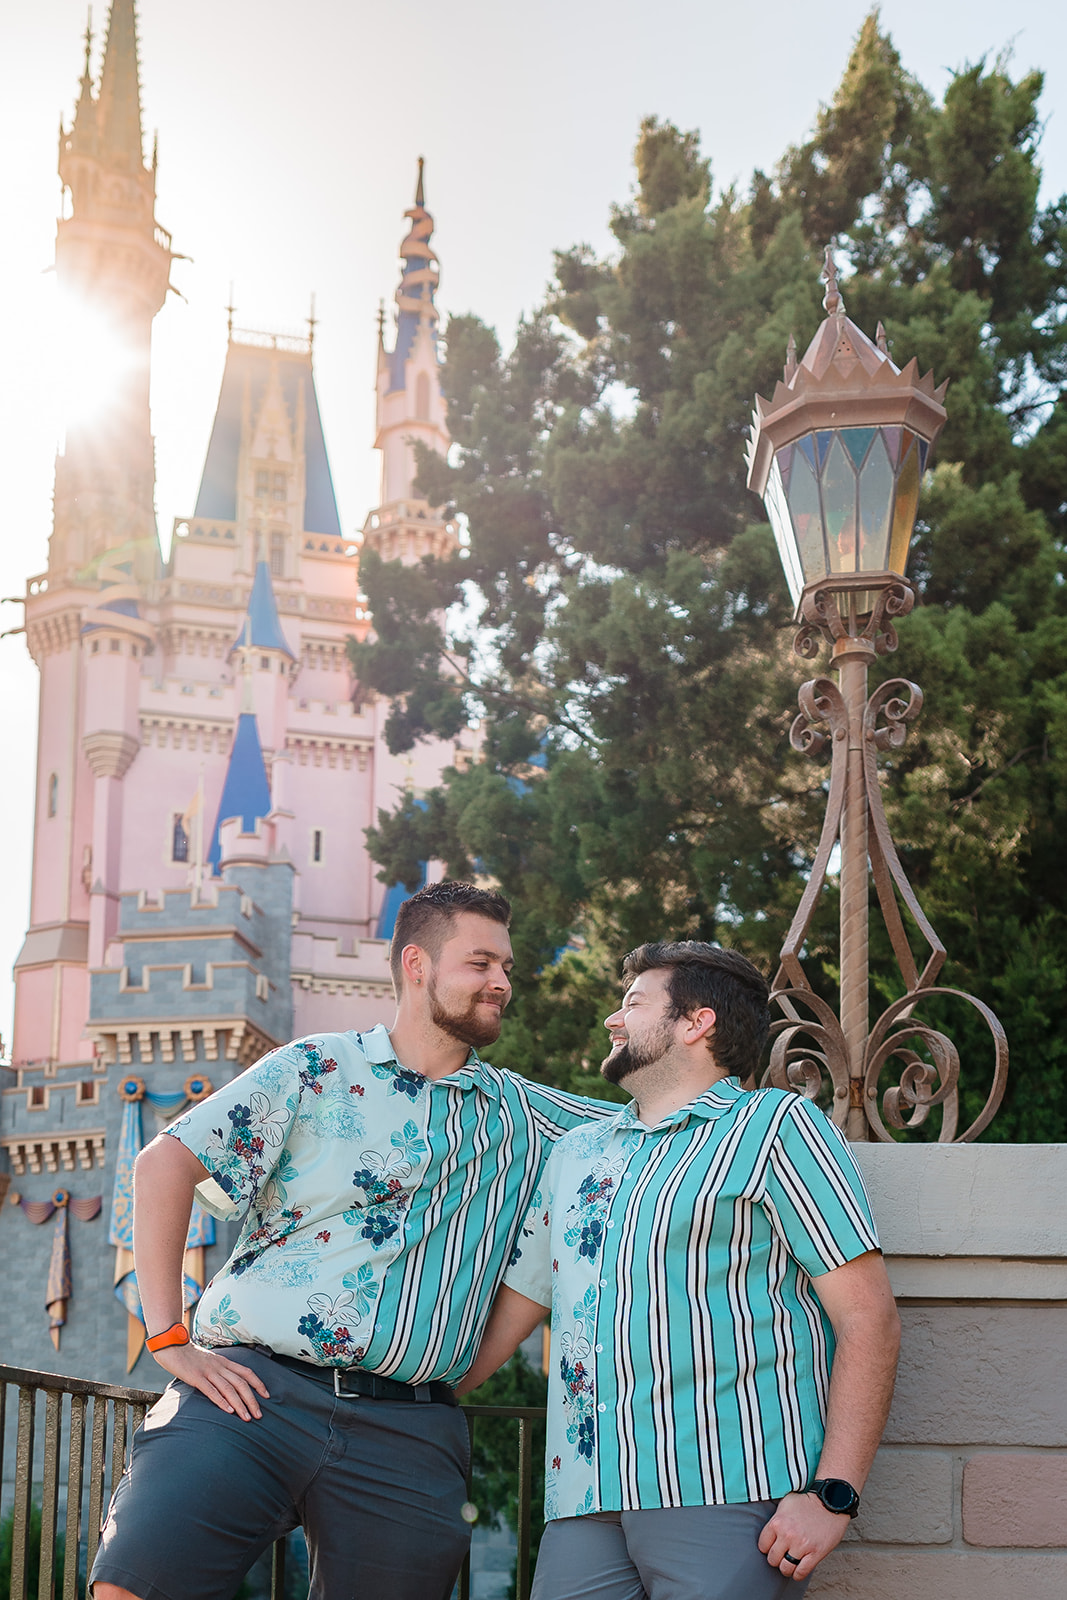 A close-up of two grooms smiling at each other with the iconic Disney castle in the background, capturing an intimate moment of love and joy at Magic Kingdom.